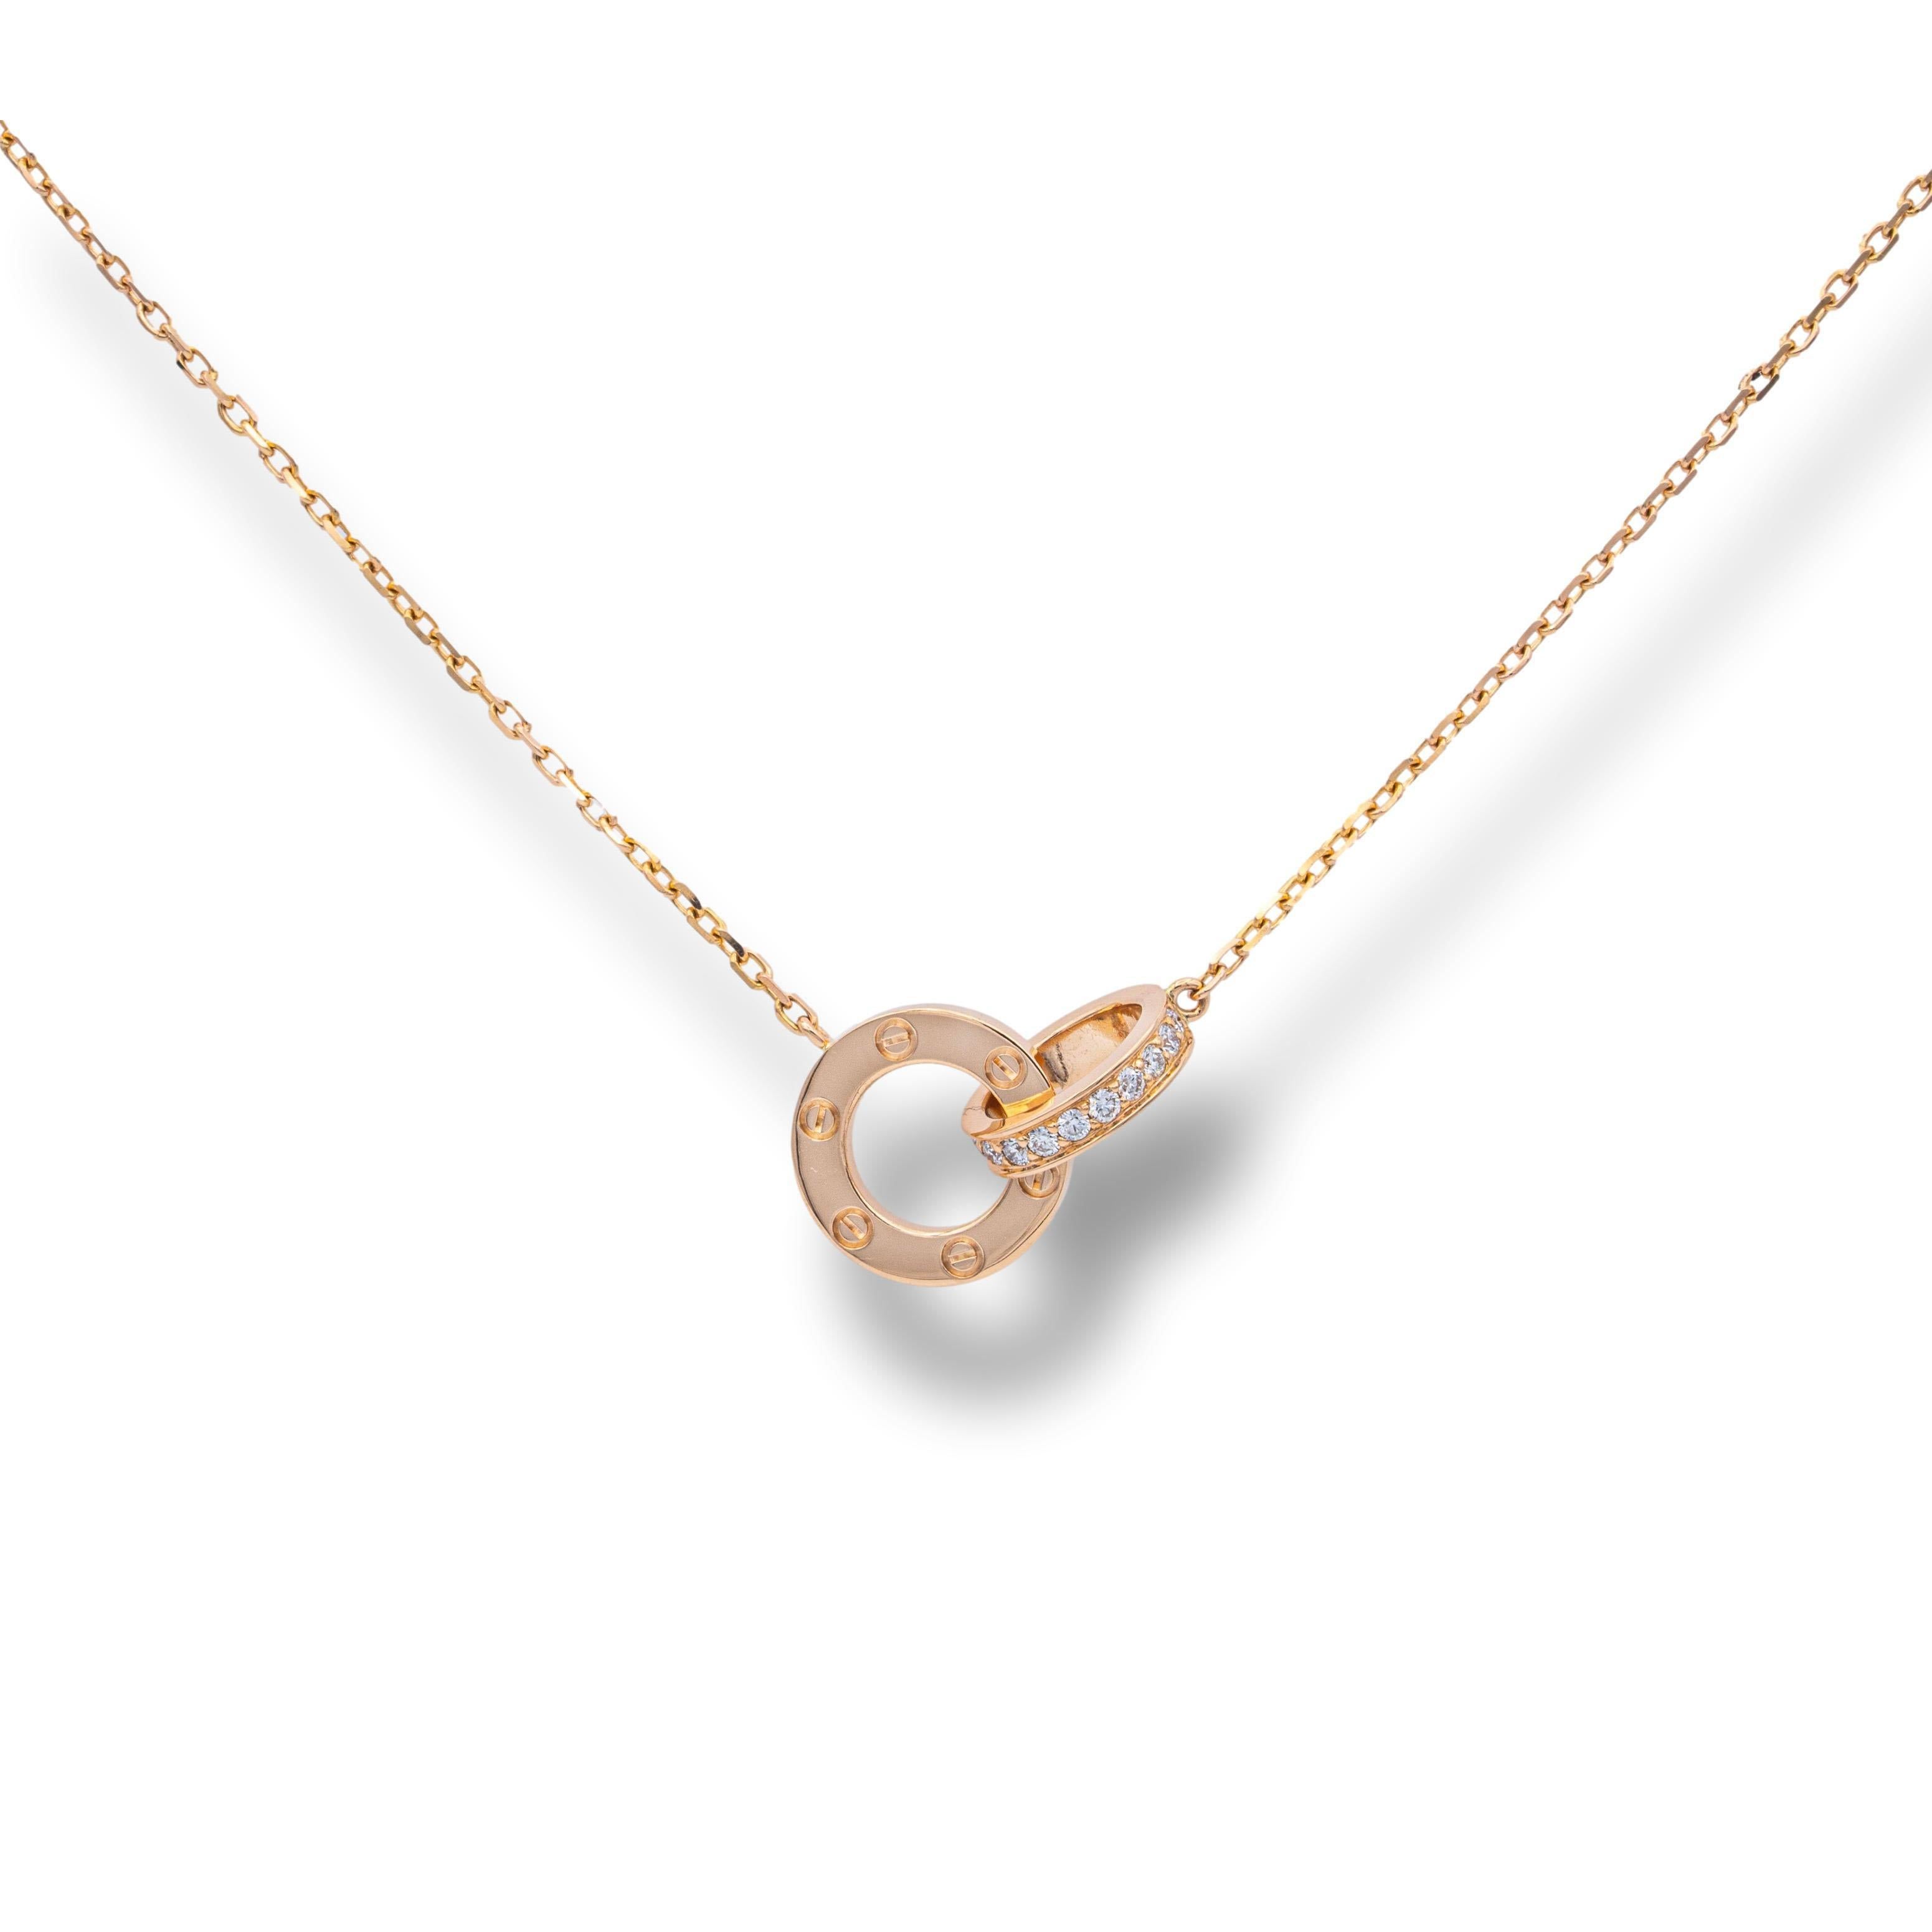 Cartier double ring necklace from the LOVE collection finely crafted in 18 karat rose gold with 48 round brilliant cut diamonds weighing 0.30 cts total. Necklace has an adjustable chain for lengths 14